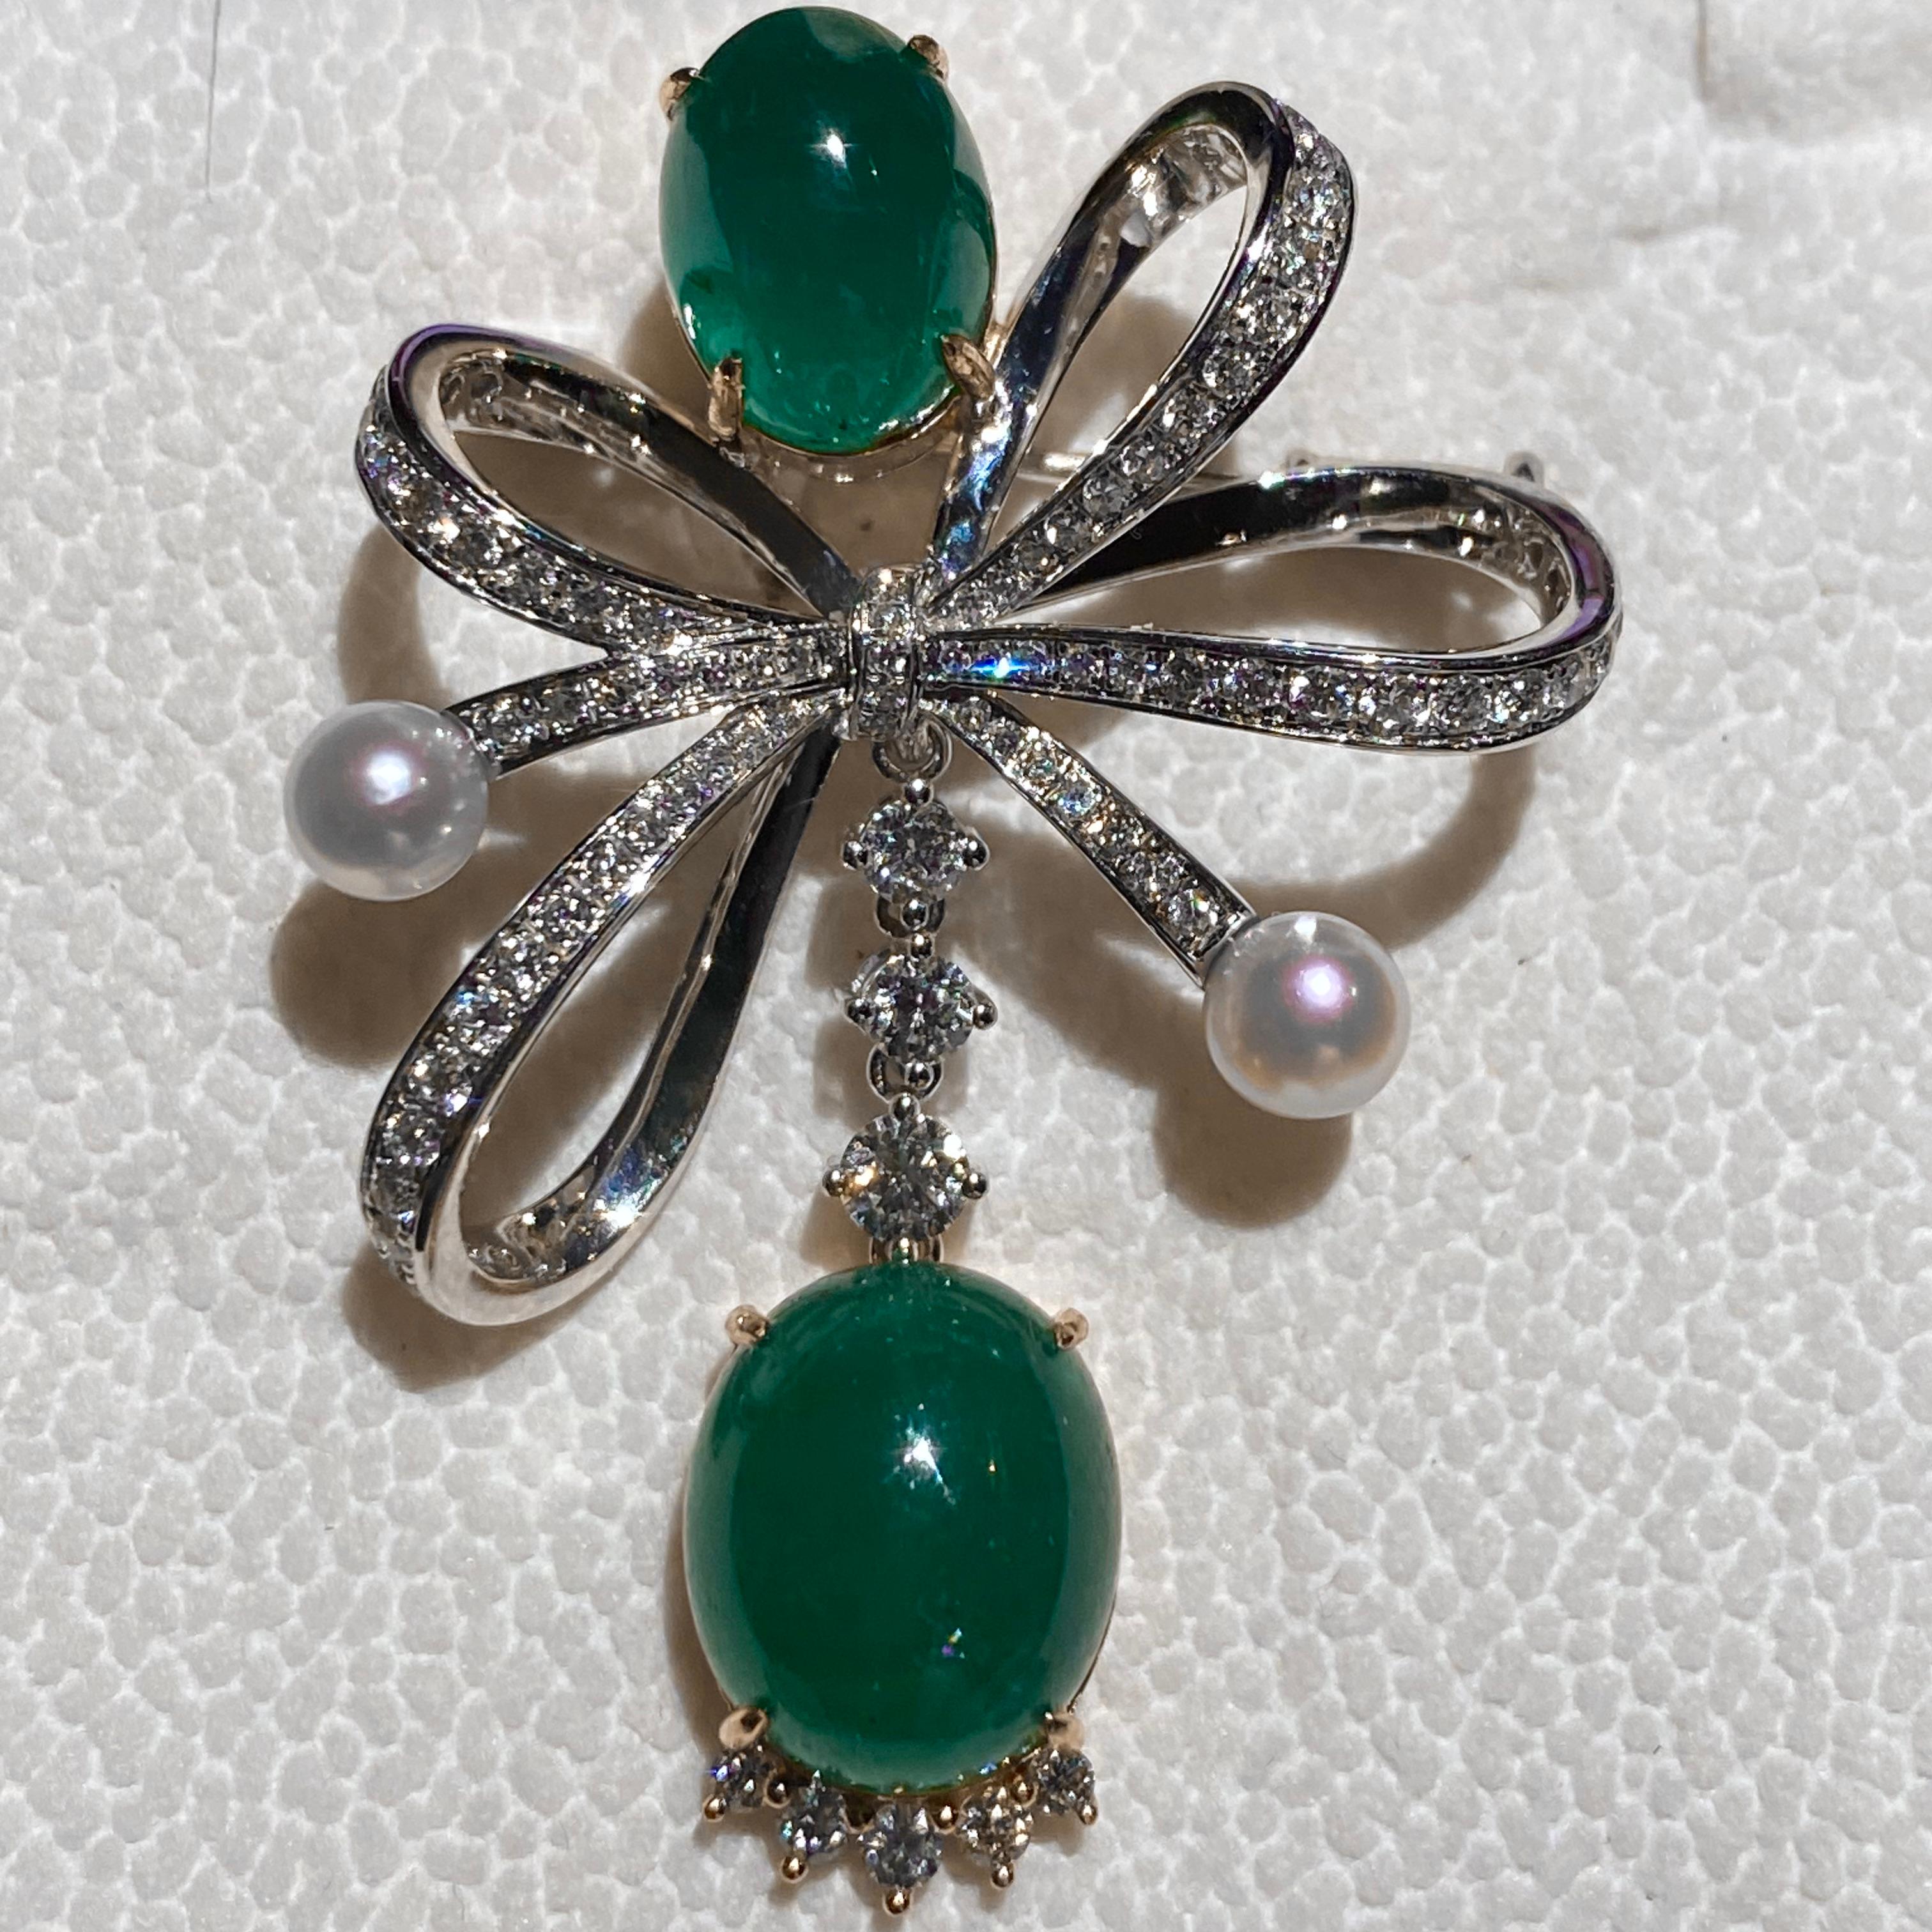 This is a piece of jewellery that can be converted into either a brooch or a pendant. The bottom hanging emerald can be removed according to your liking. For a more casuall event, you might need a slightly smaller brooch/pendant and with this, you